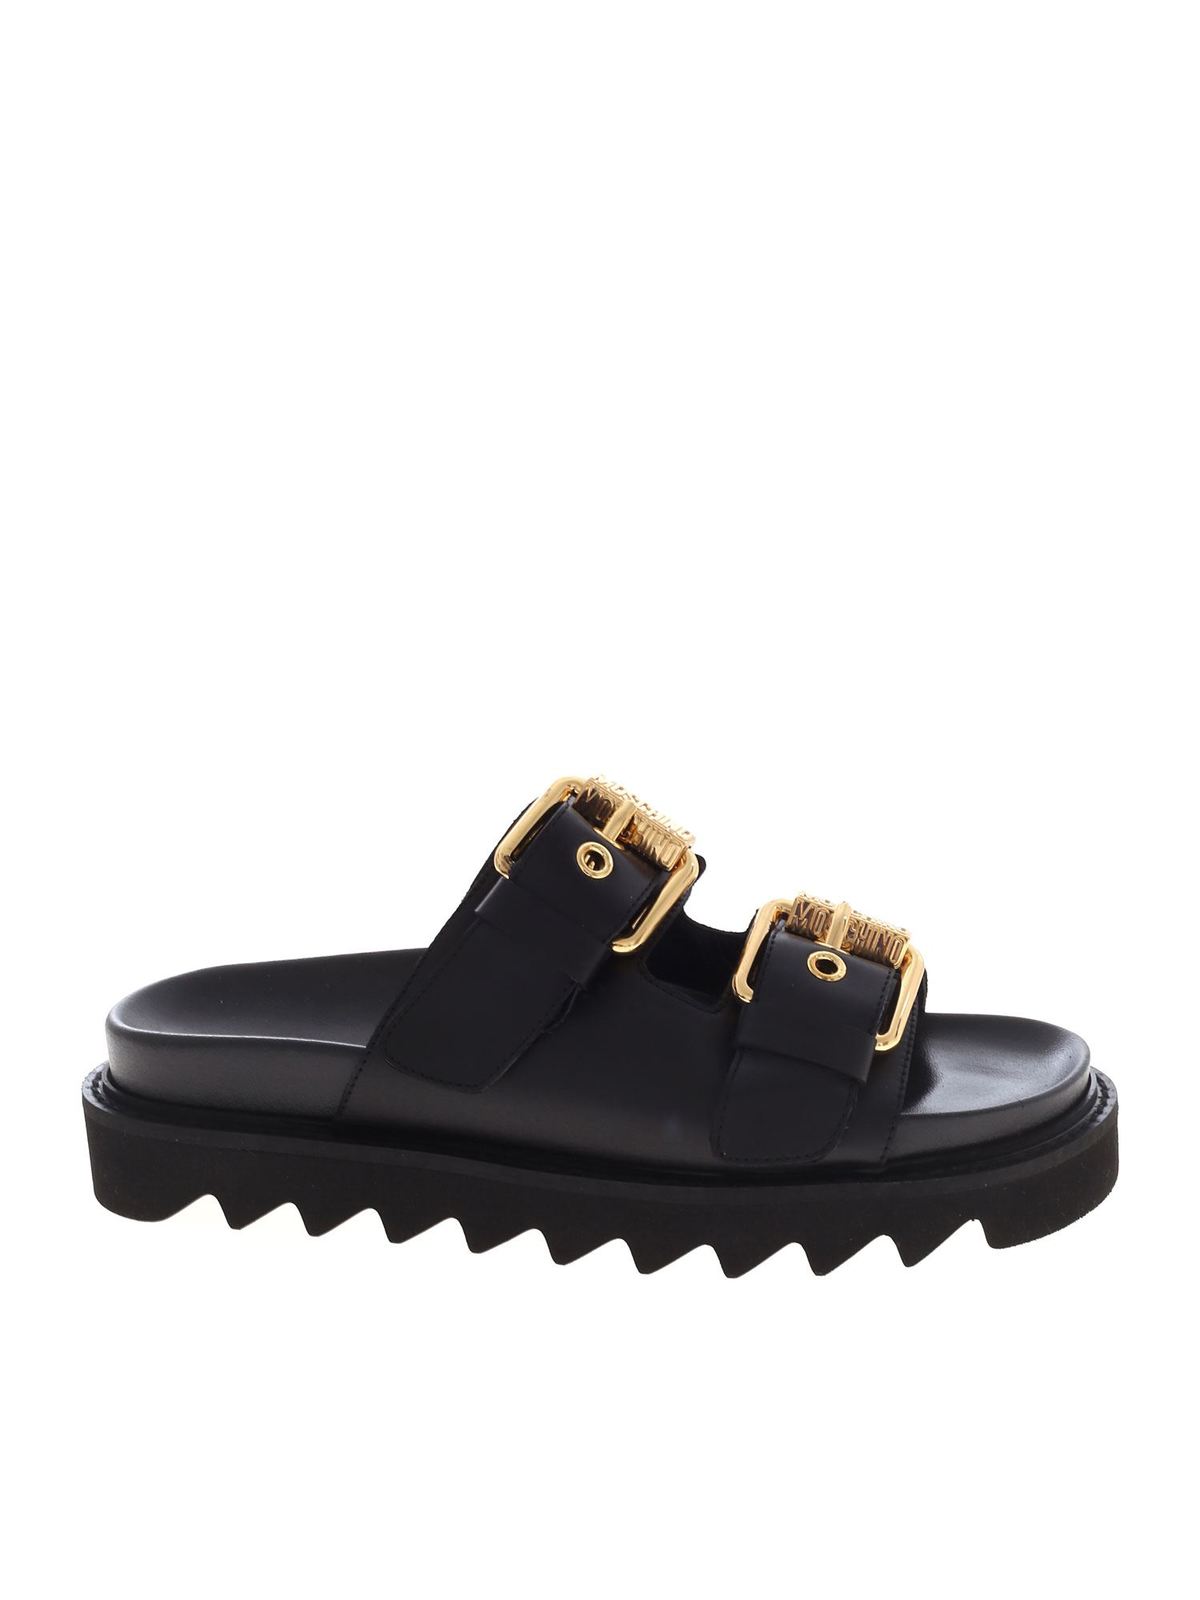 MOSCHINO BRANDED BUCKLES SANDALS IN BLACK